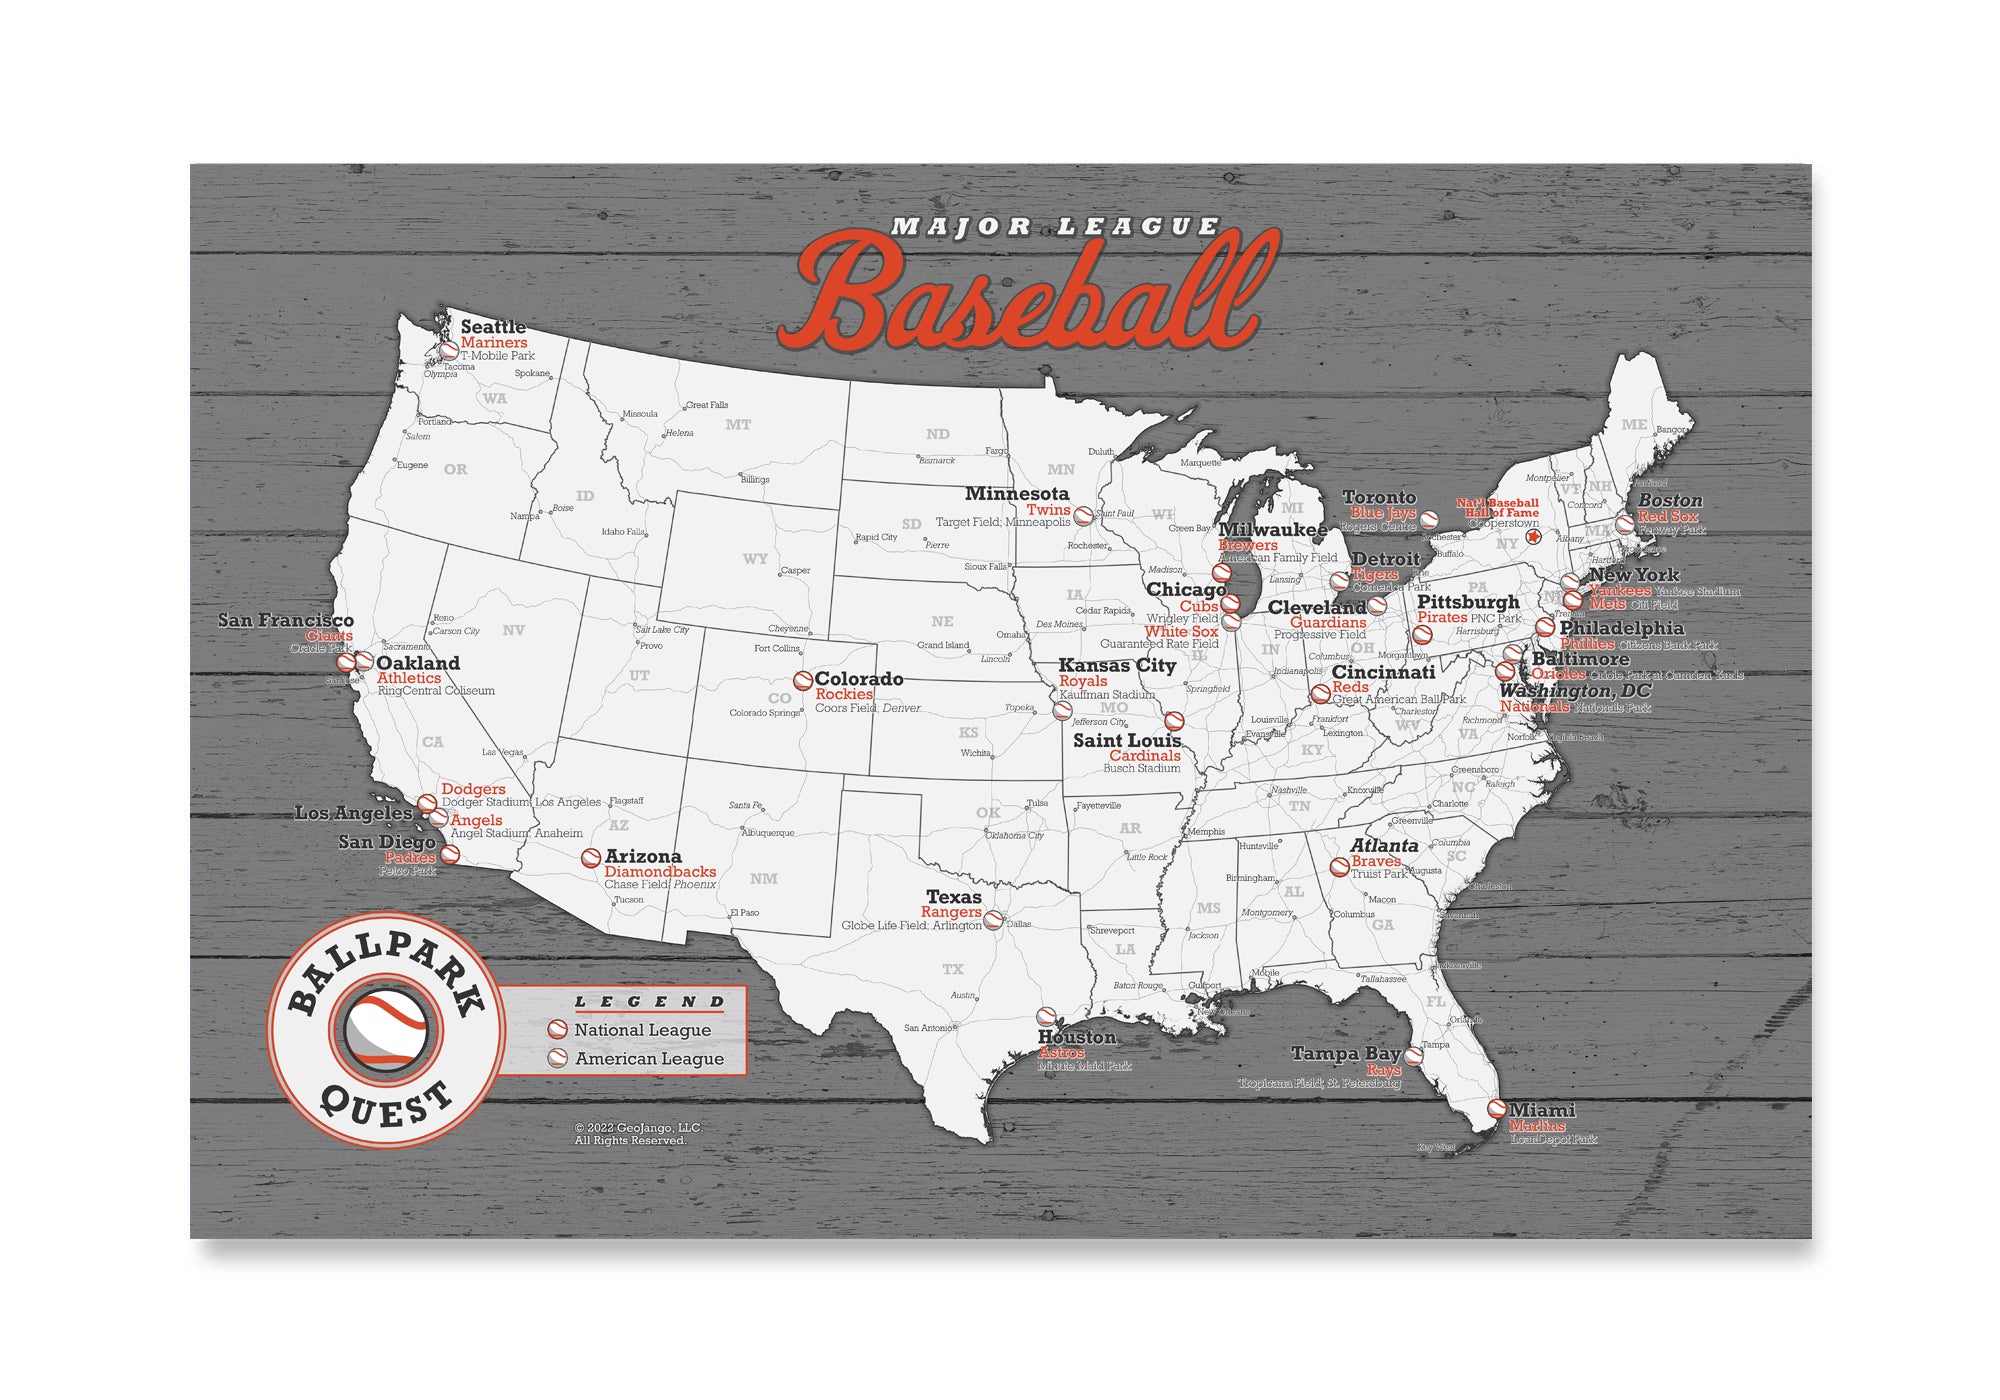 Amazoncom Major League Baseball Pushpin Map  Mark your travels to your  favorite MLB baseball stadiums  Sports Decor  Perfect for the baseball  fan  Includes PushpinsBeige 36x24 Sports  Outdoors